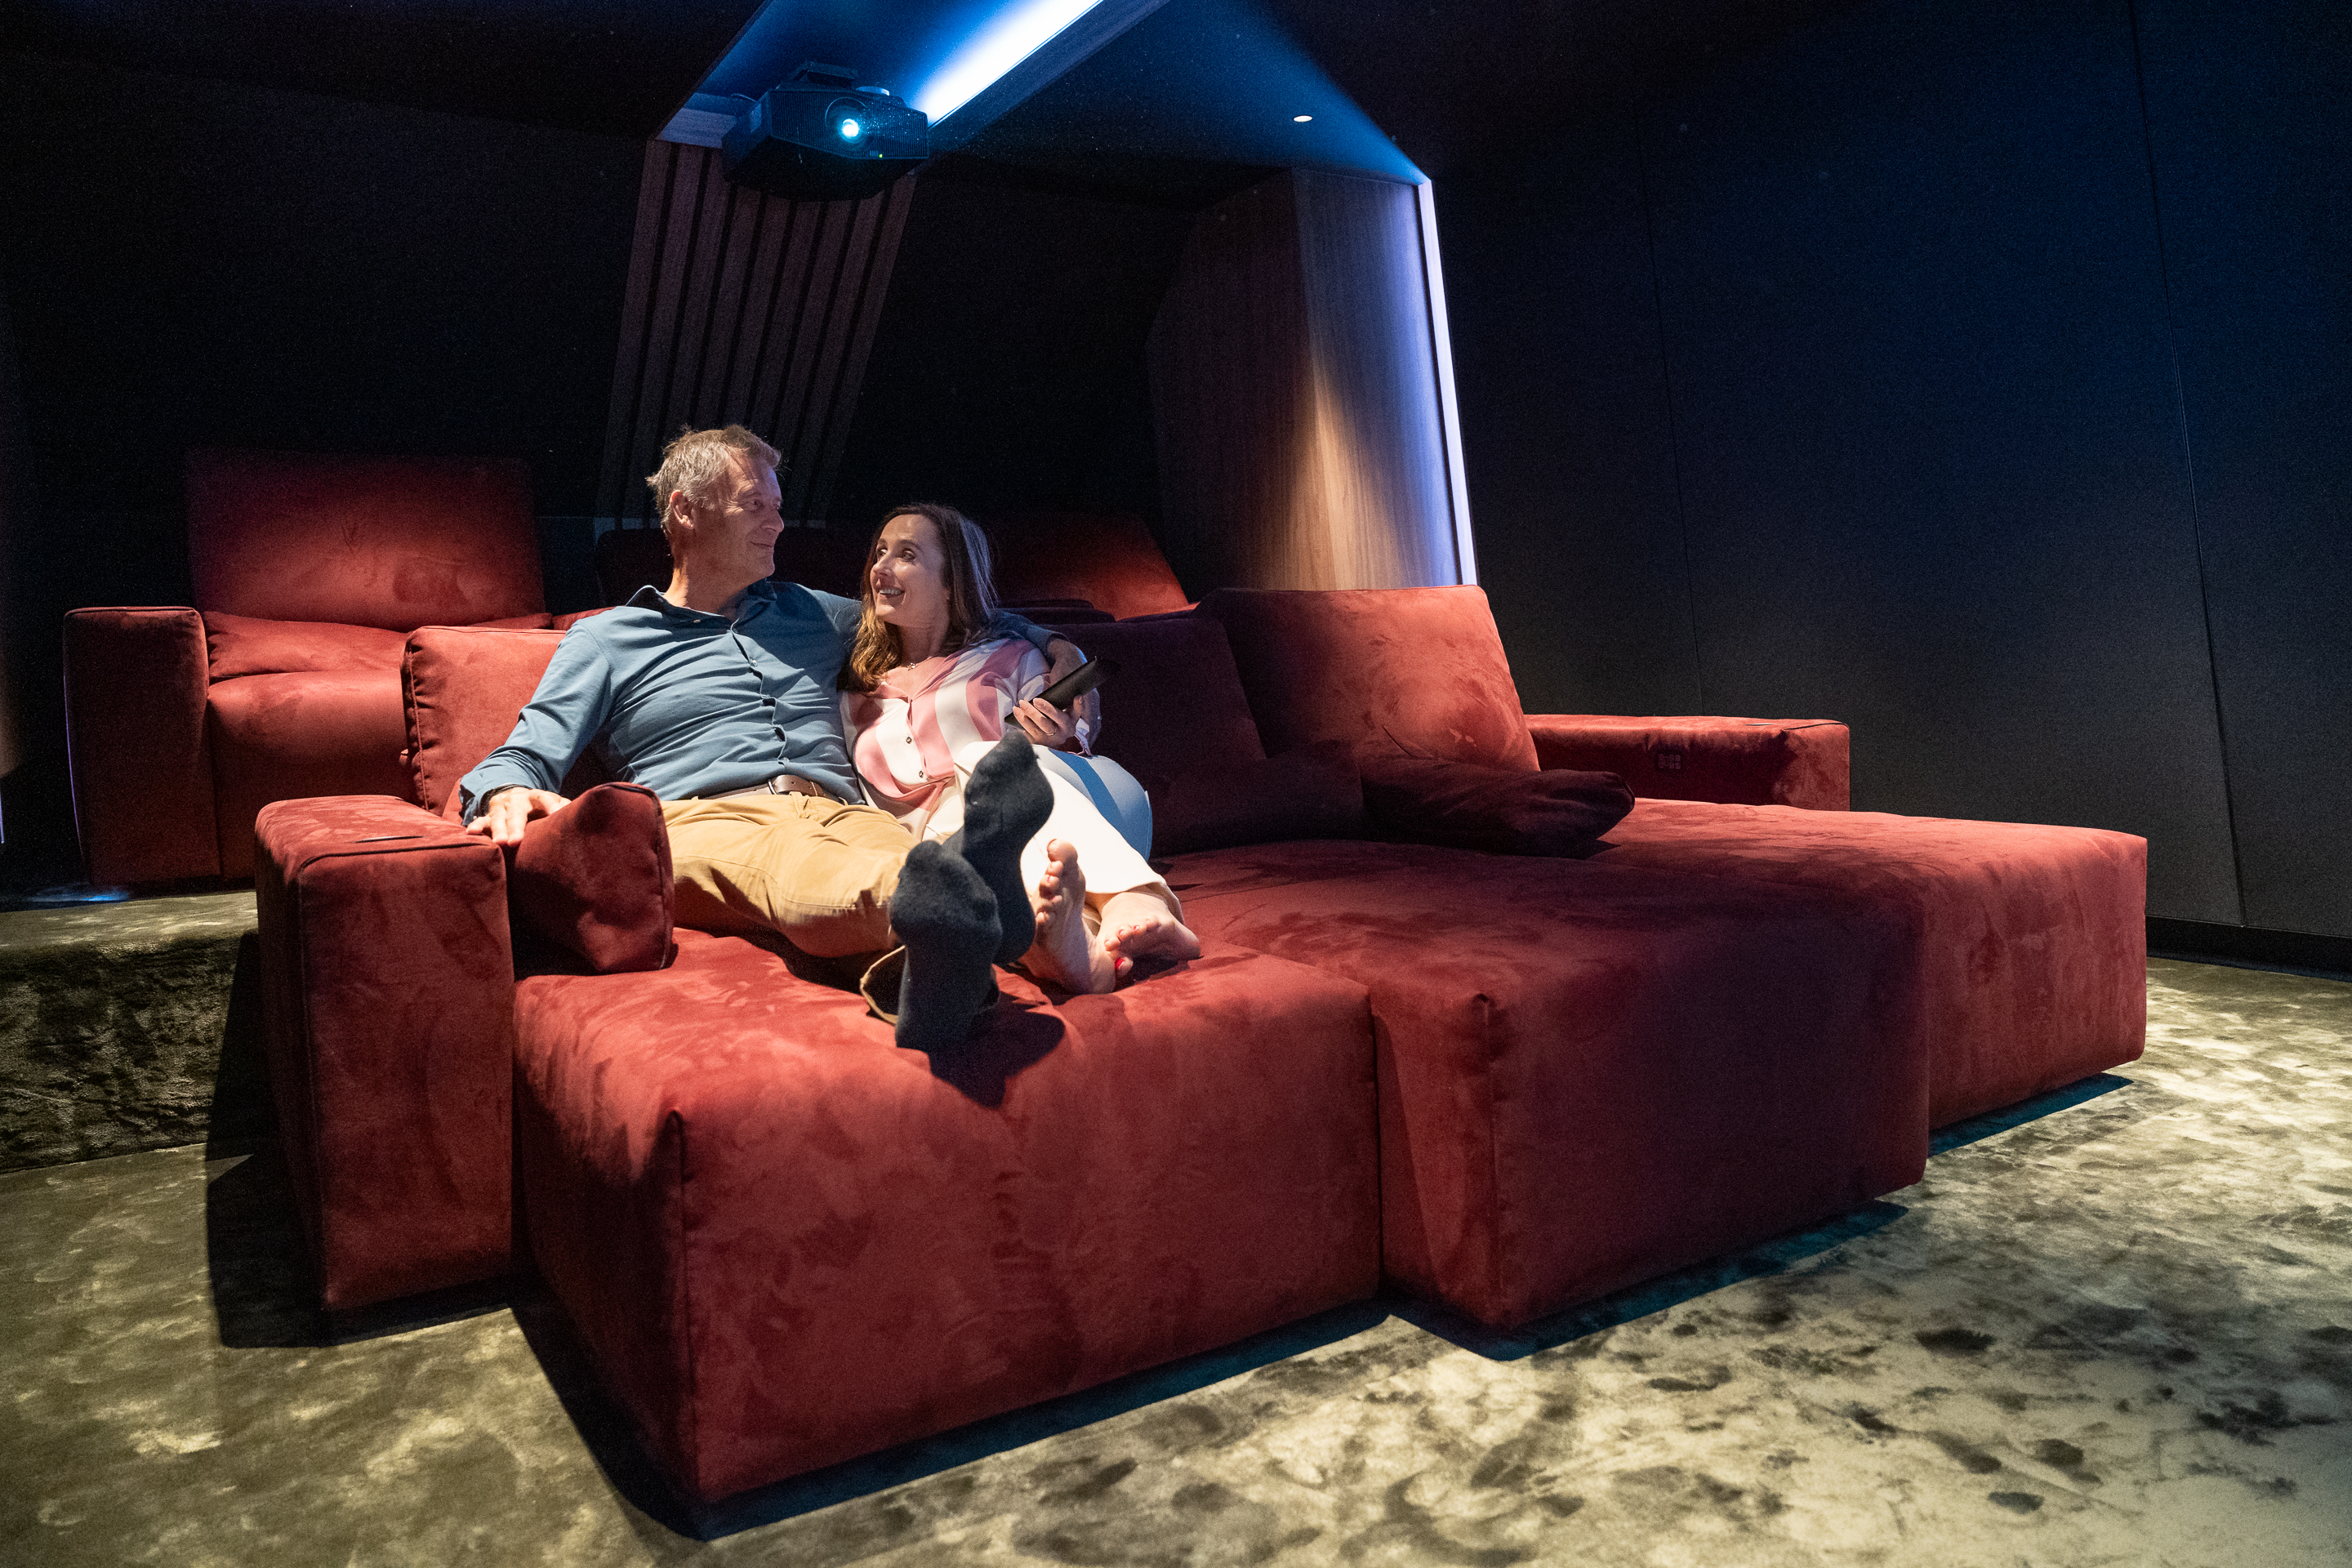 A demo lets you experience the atmosphere of a home cinema.